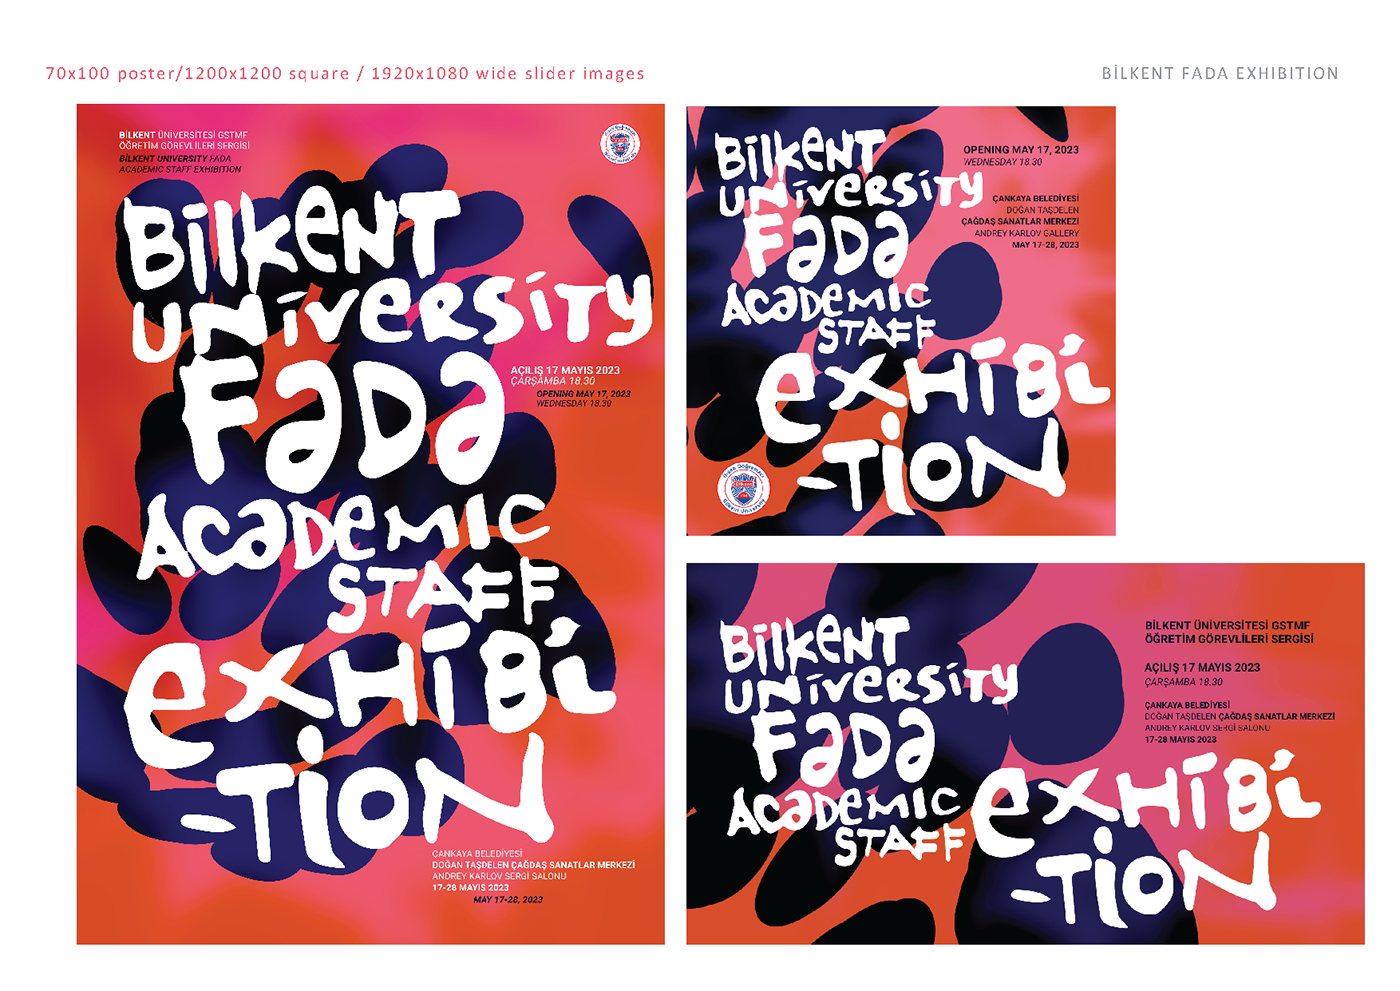 bilkent Calligraphy   calligraphy poster  ekinklch Exhibition  Group exhibition lettering lettering poster typography   visual identity